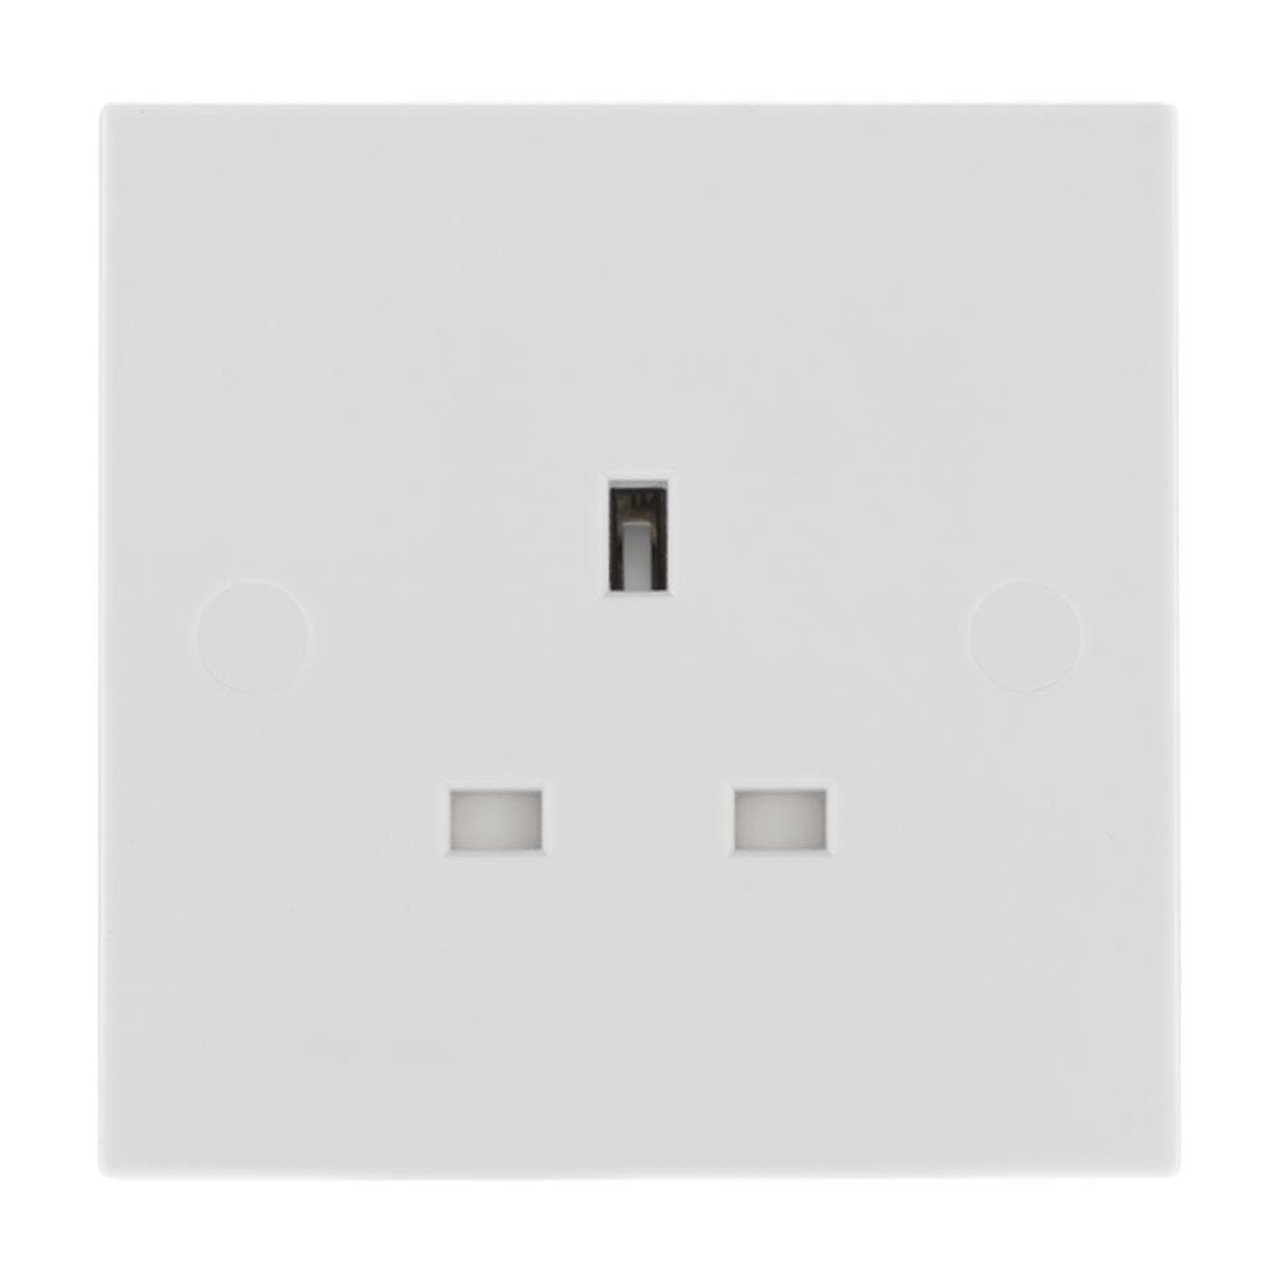 BG Nexus Moulded White Square Edge 13A 1 Gang Unswitched Socket